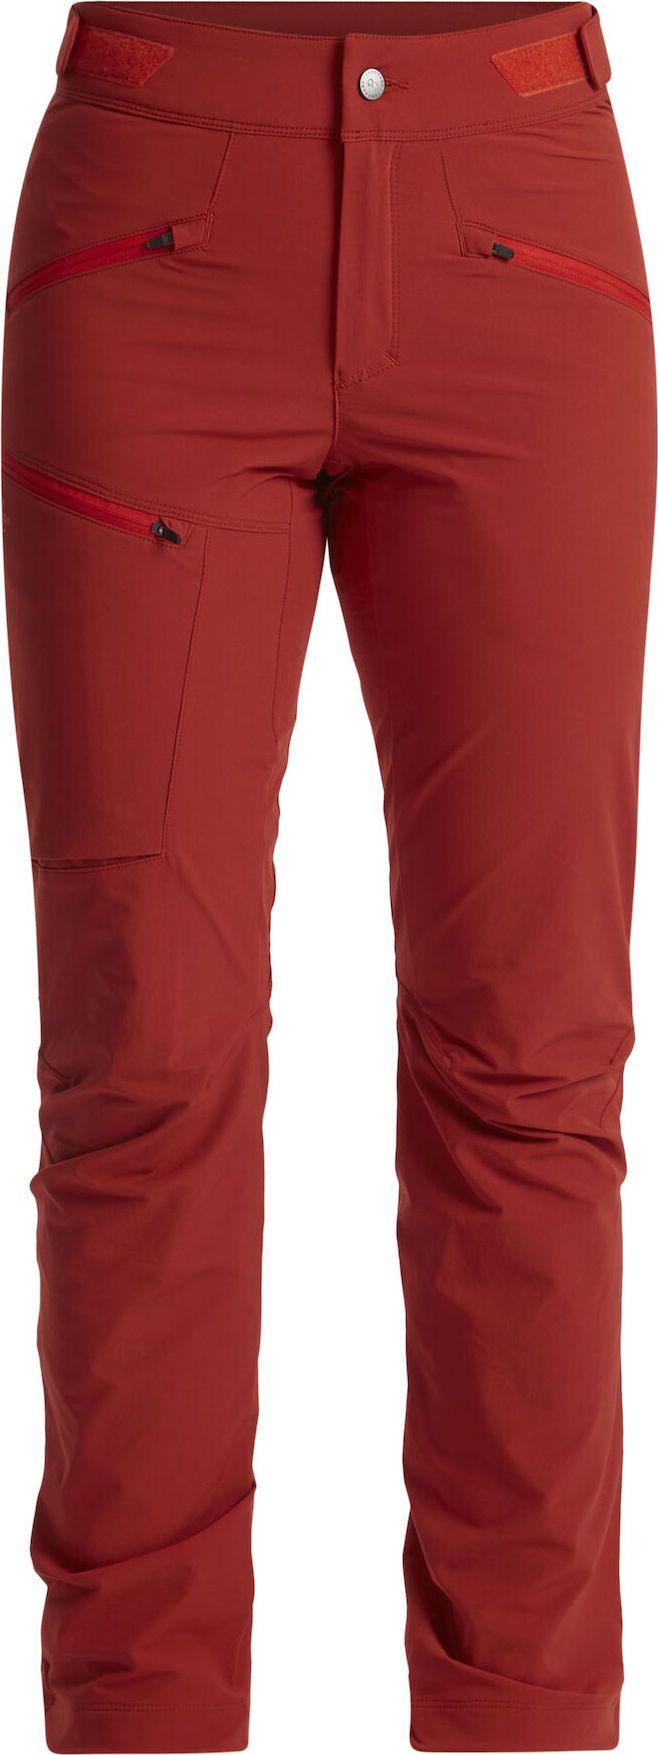 Lundhags Women's Askro Pant Mellow Red